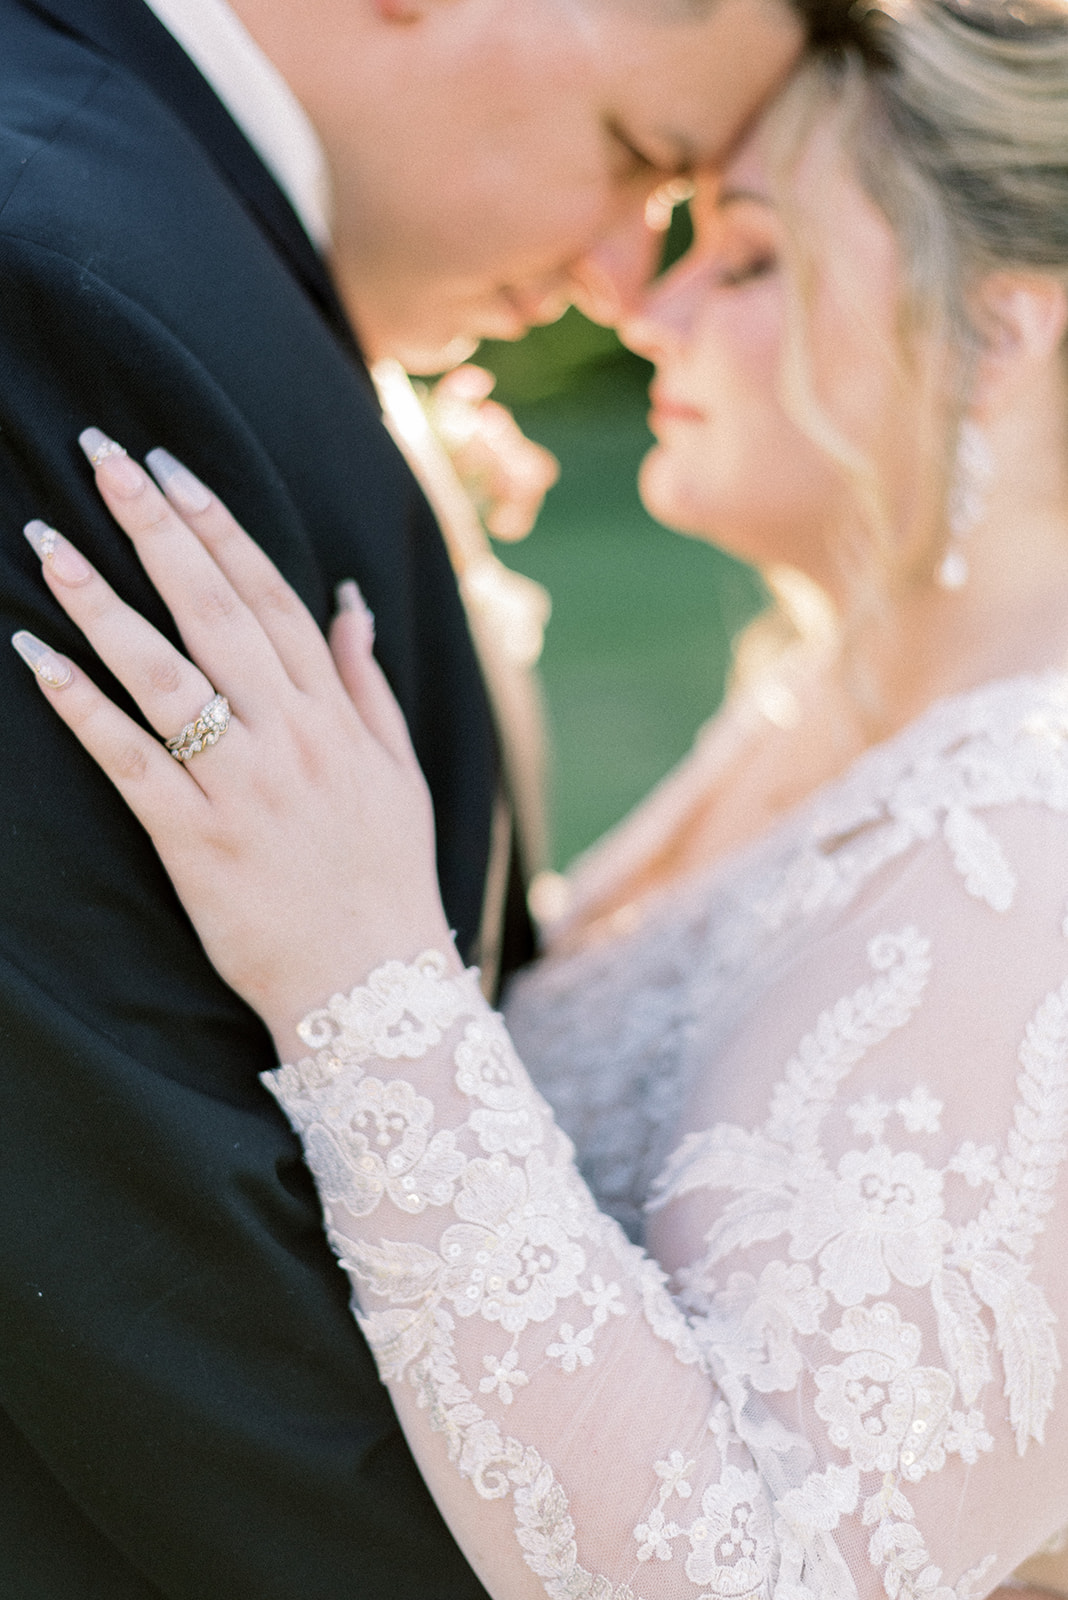 Pennsylvania wedding photographer captures bride and groom touching foreheads